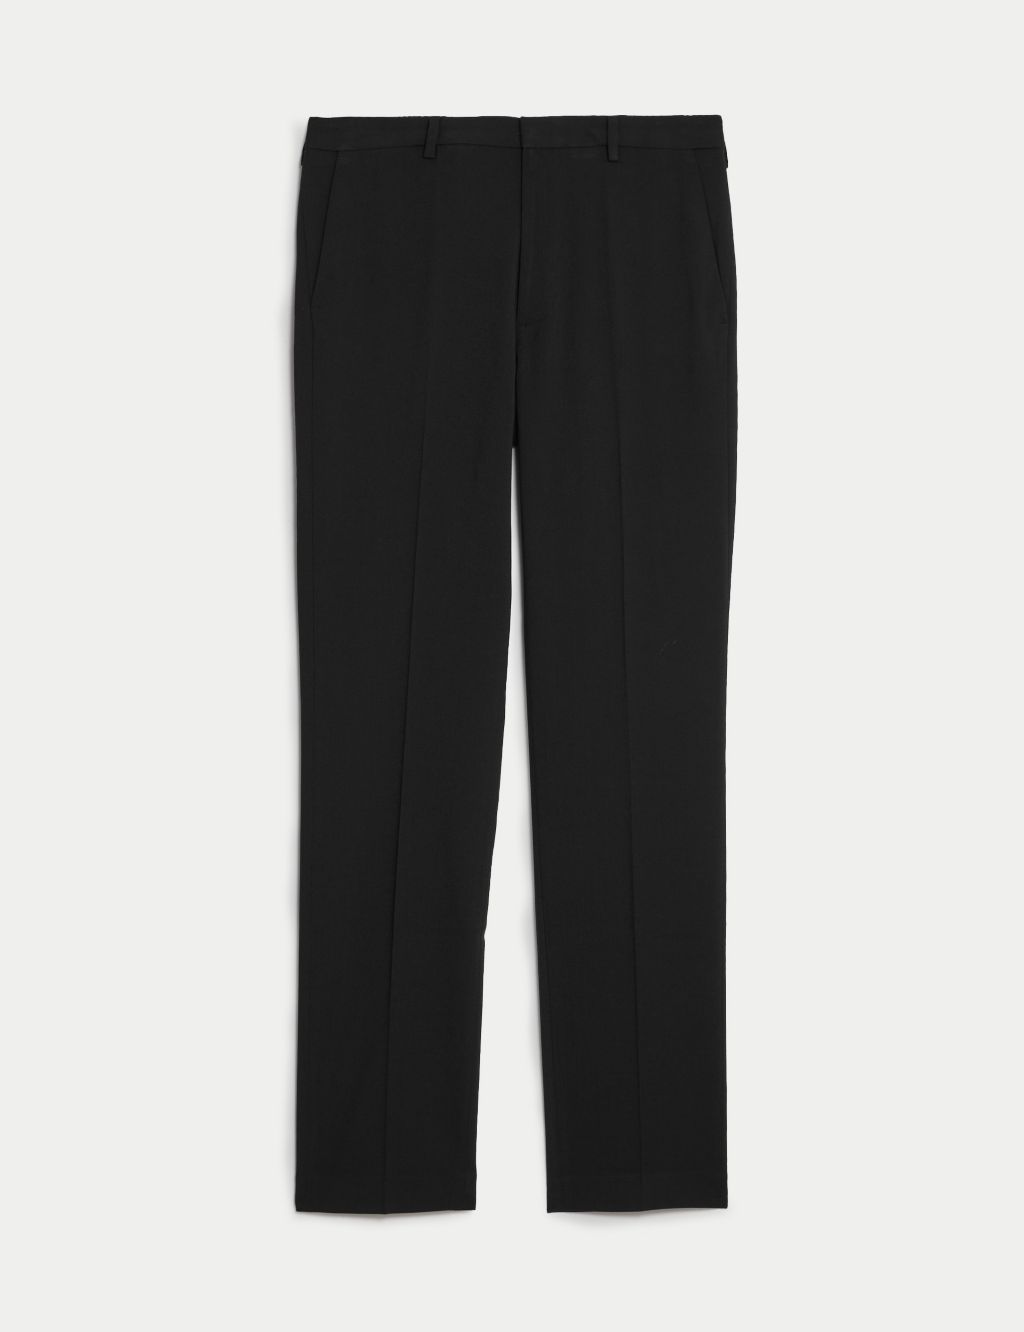 Regular Fit Stretch Trousers image 8